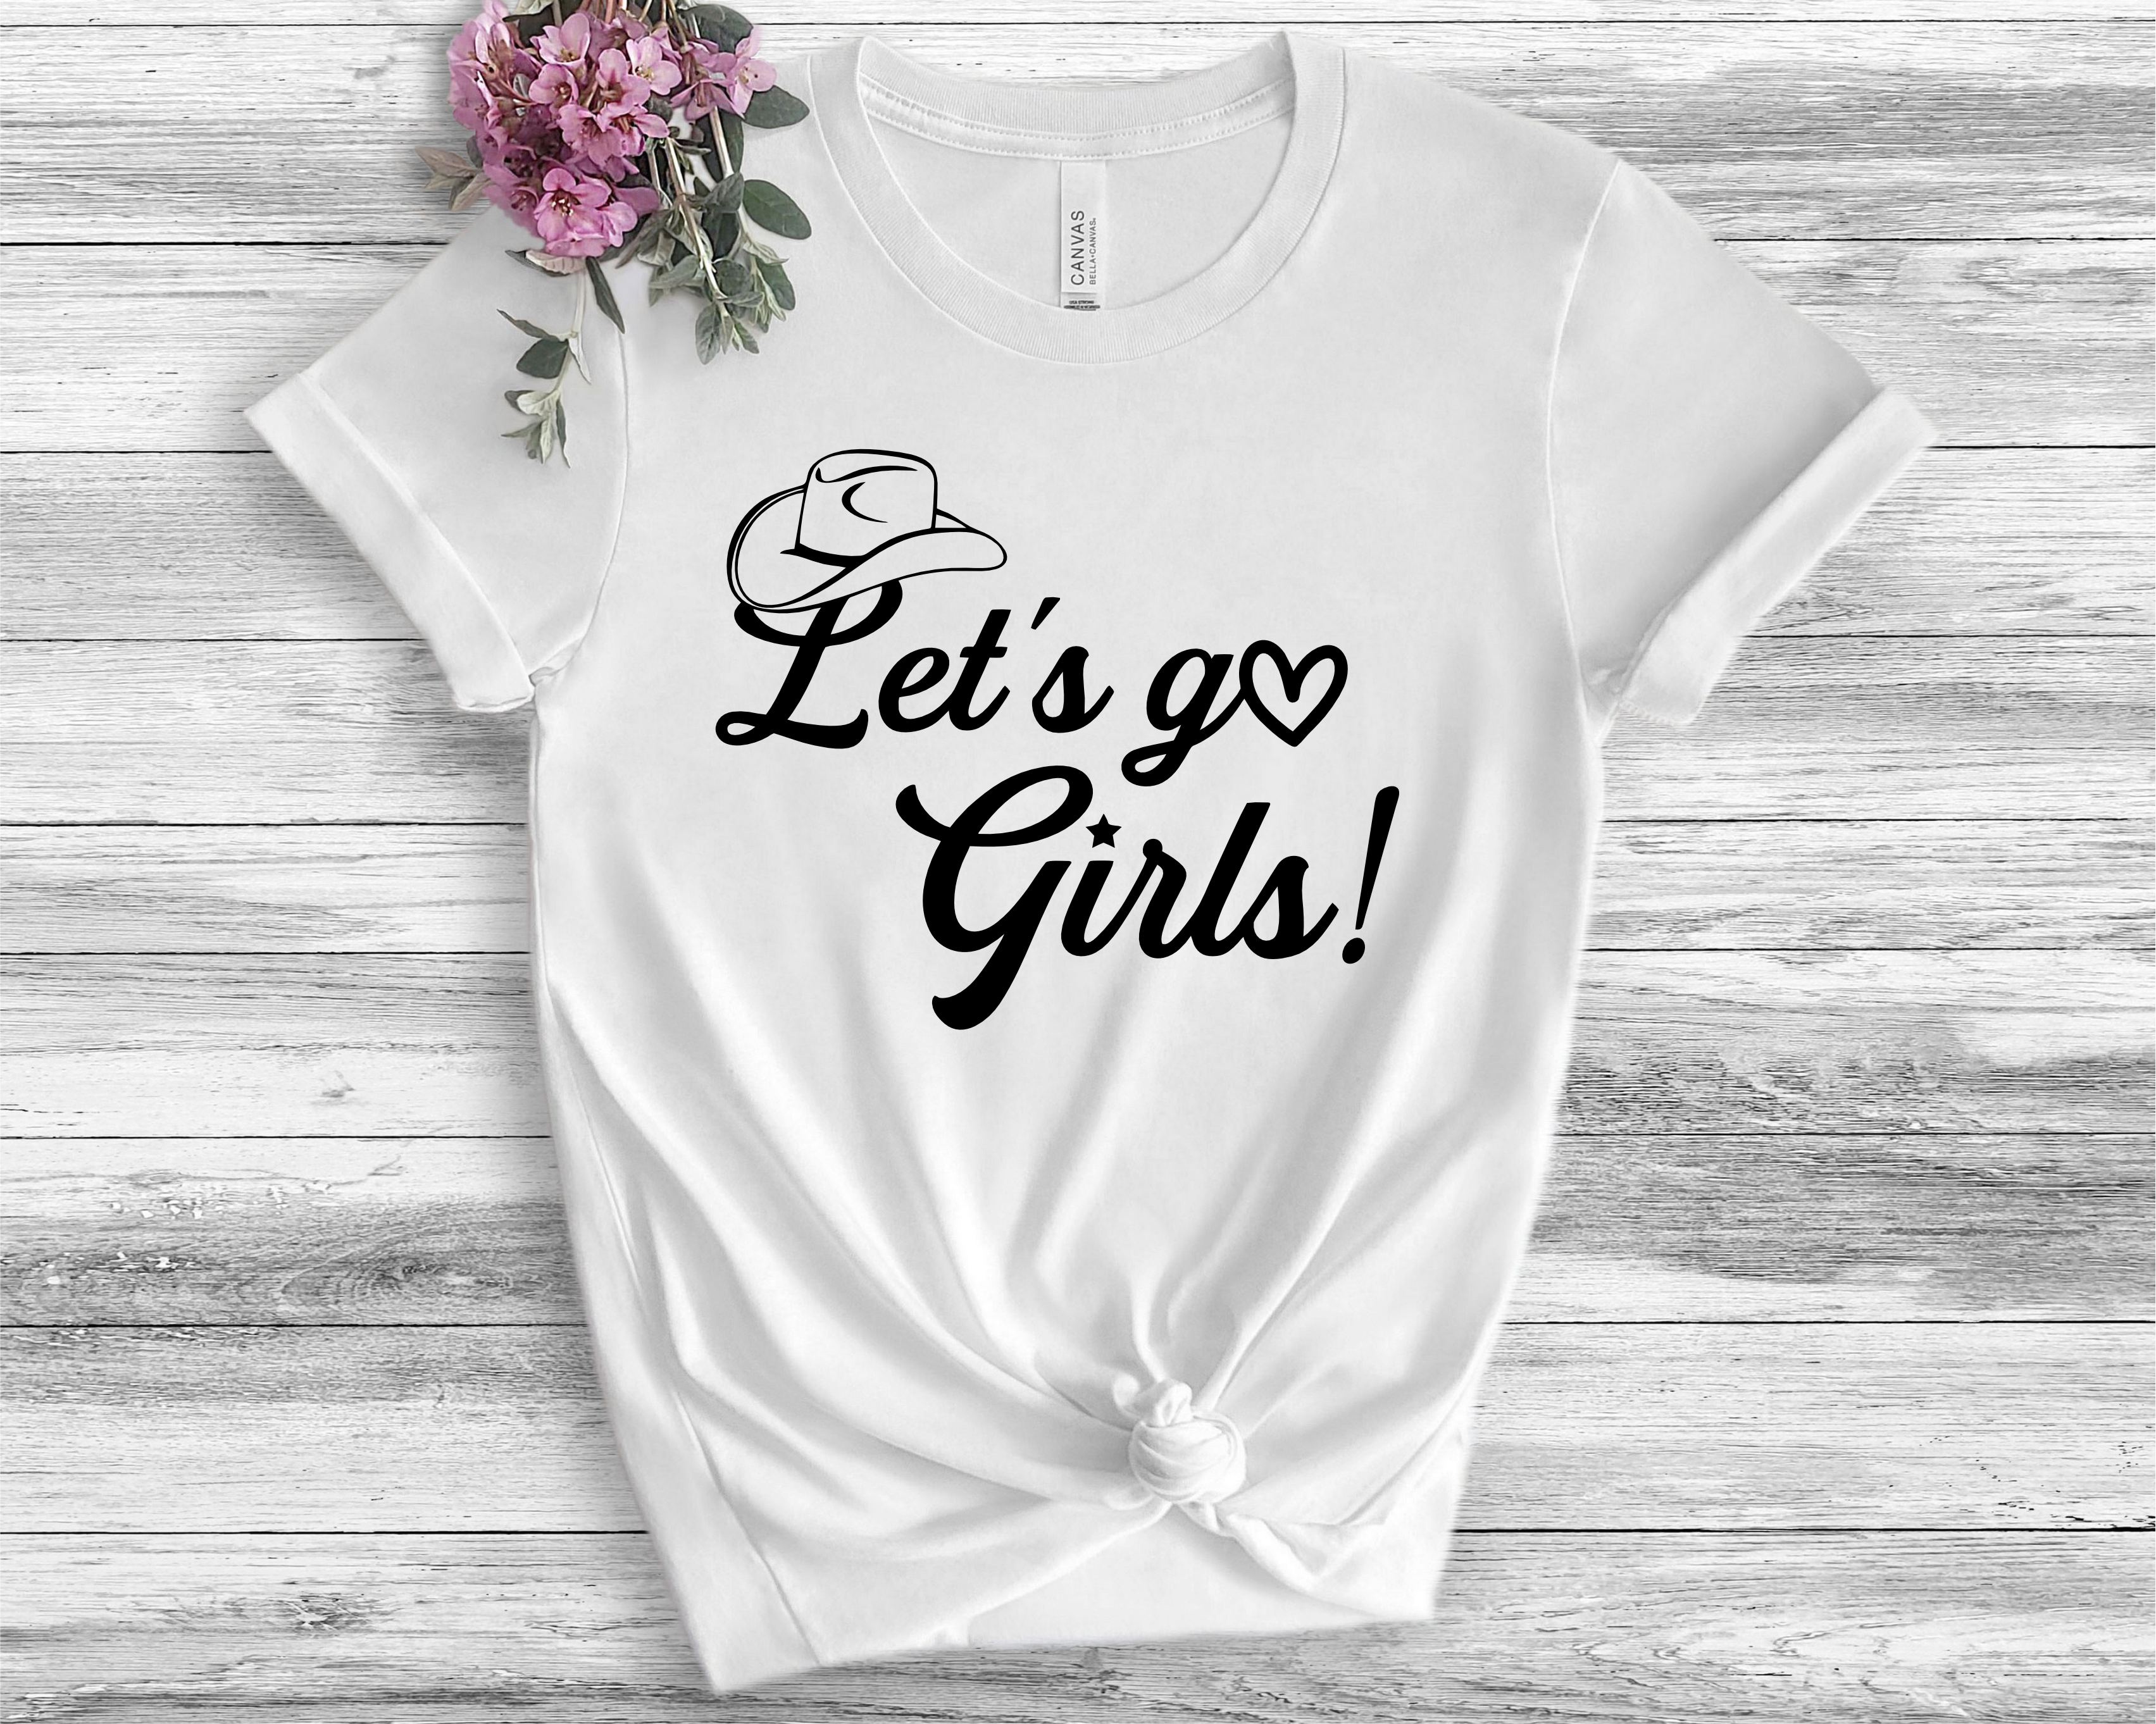 Let's Go Girls Cowgirl Hat  - Bachelorette Party Apparel - Commercially printed shirt - Fast Turn Around Time